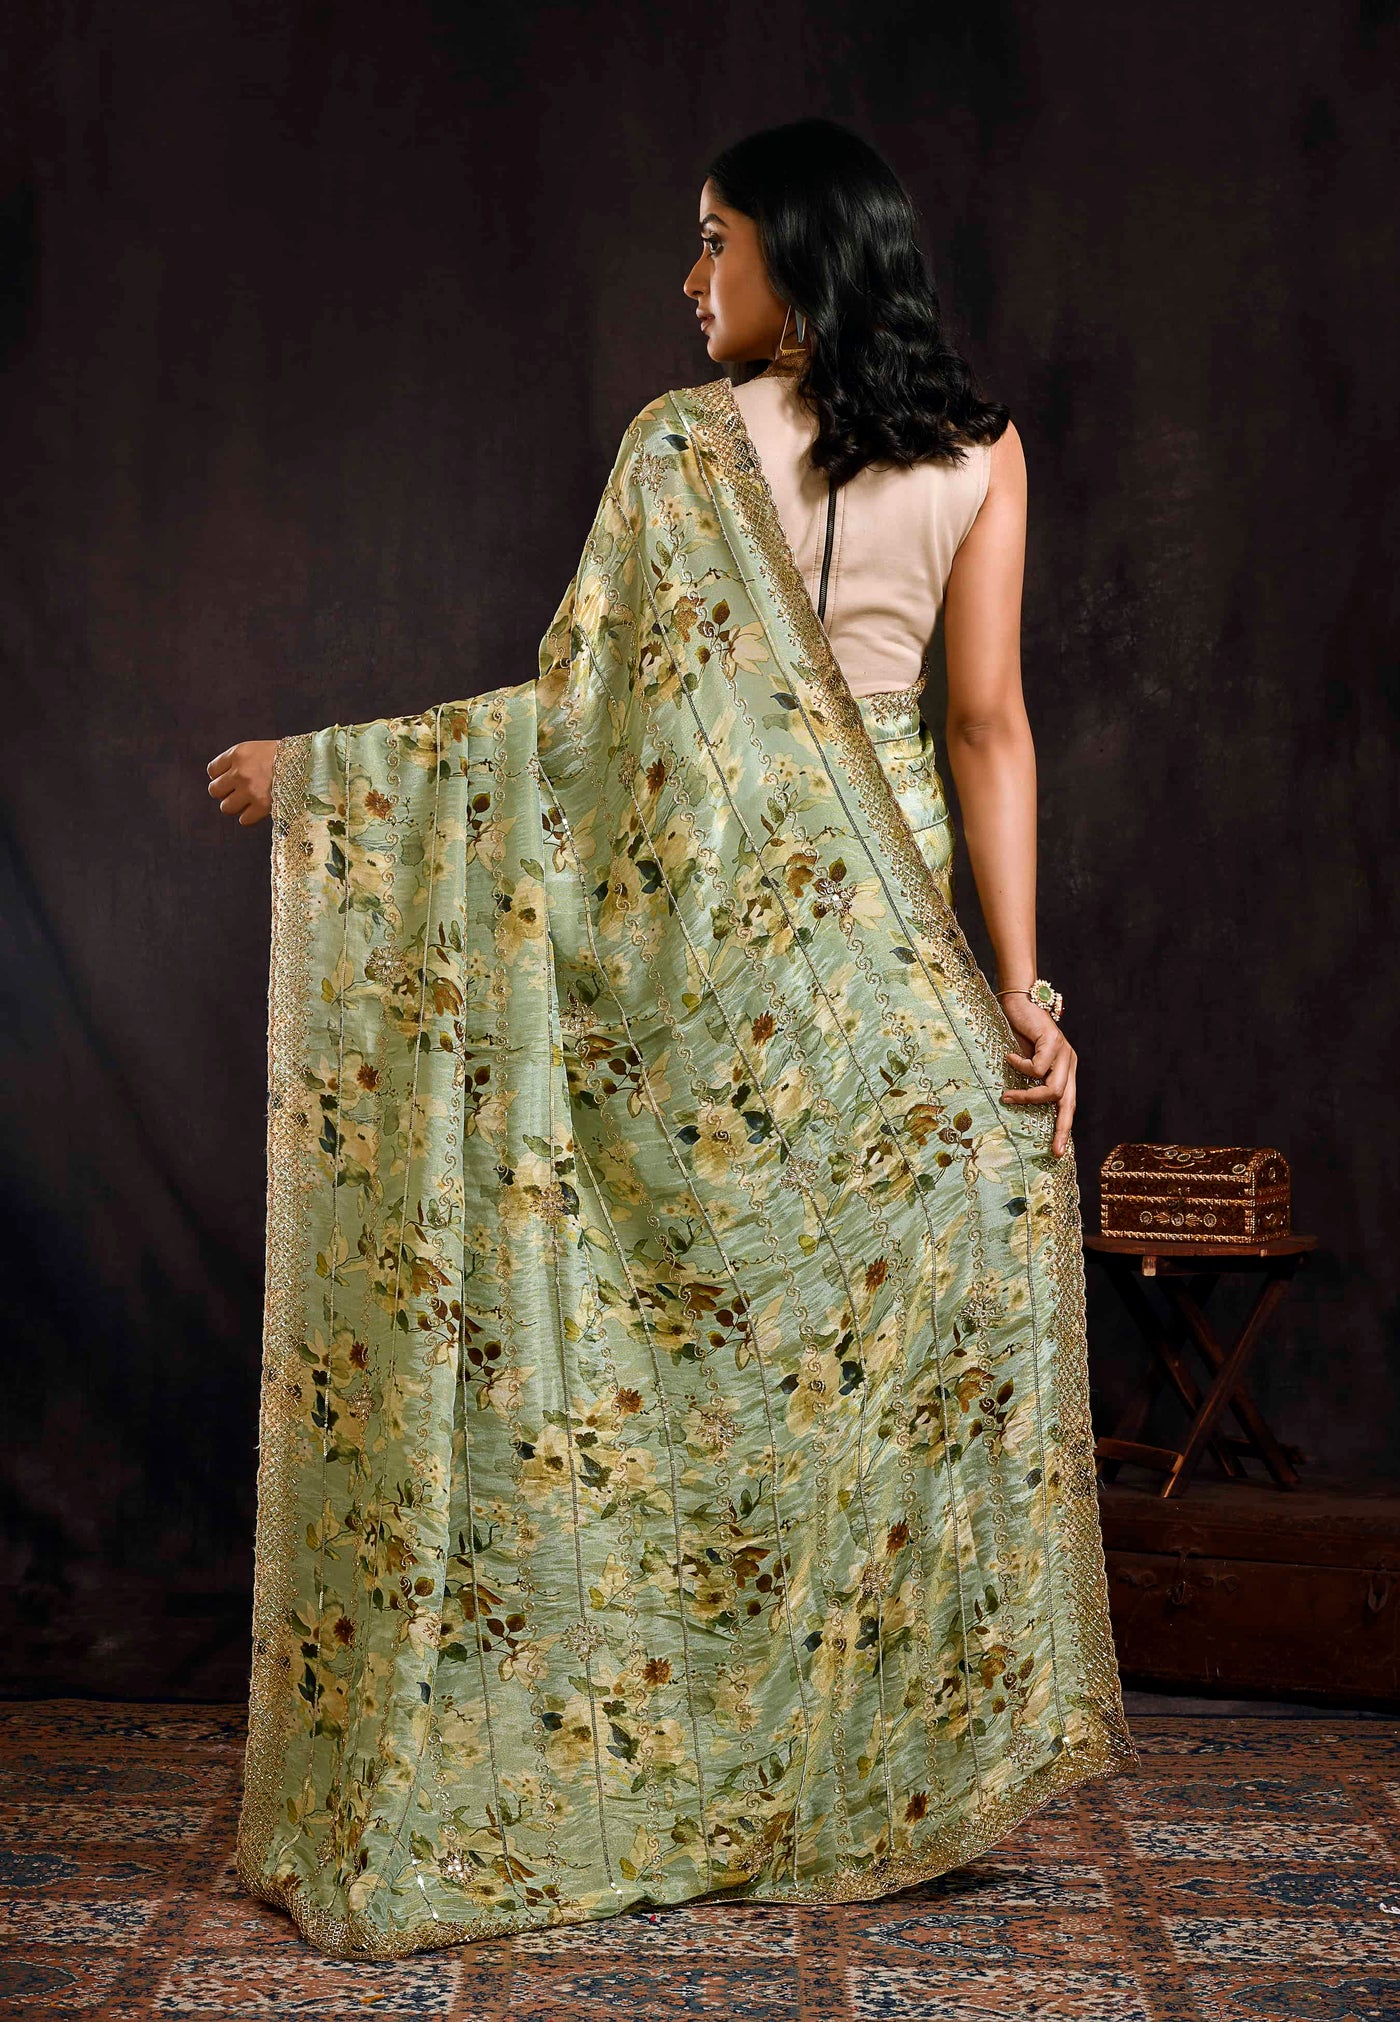 Pistachio Green Floral Embroidered Saree